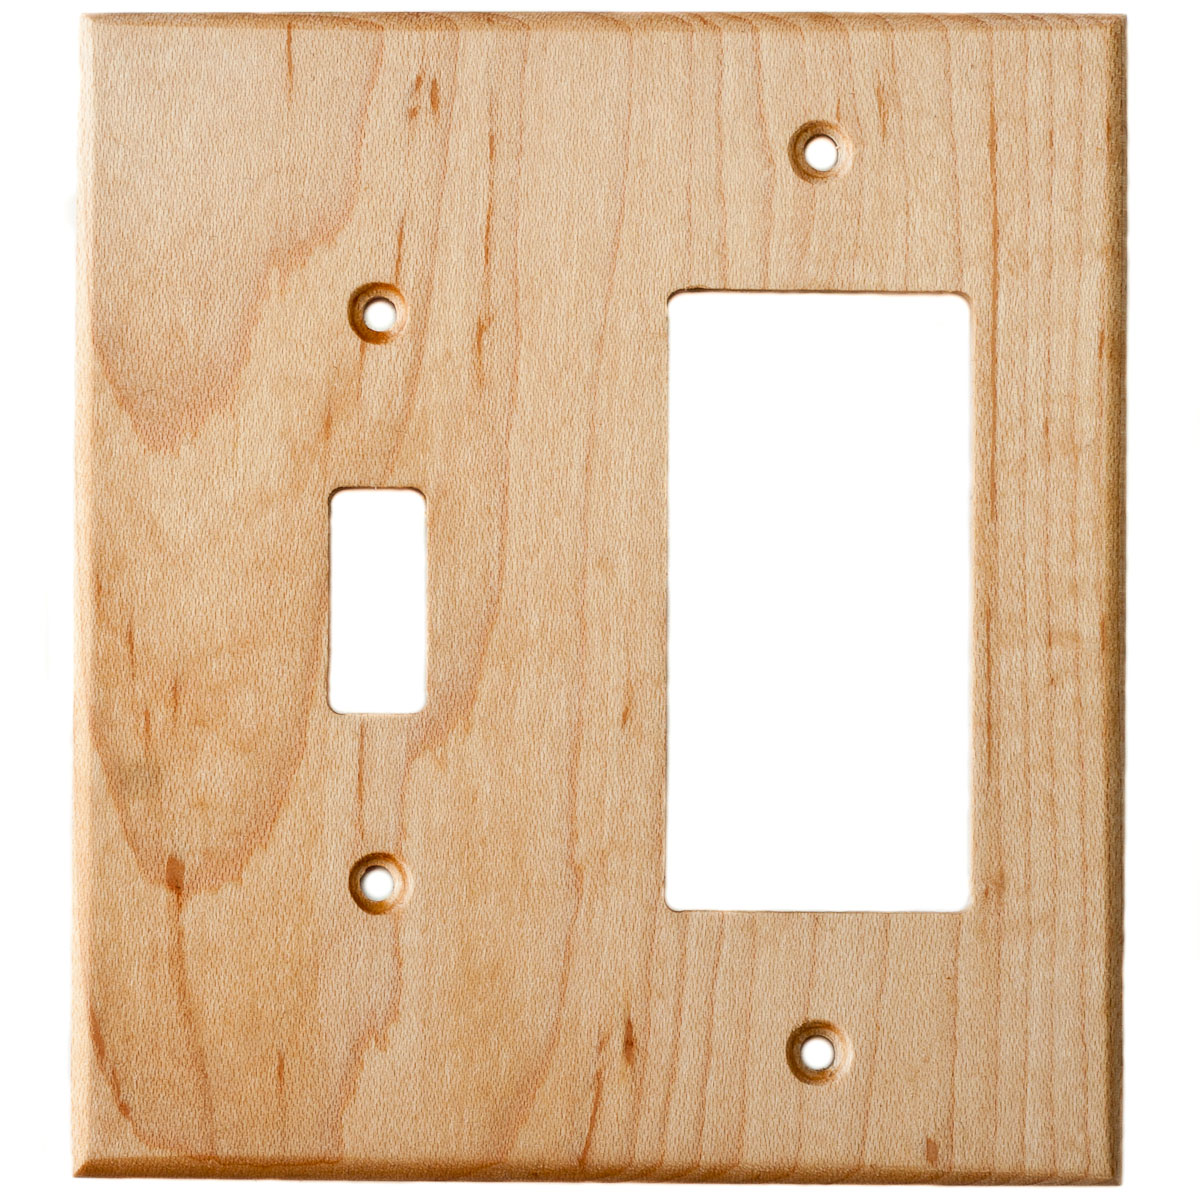 Maple Wood Wall Plate - 2 Gang Combo - Light Switch, GFCI Outlet